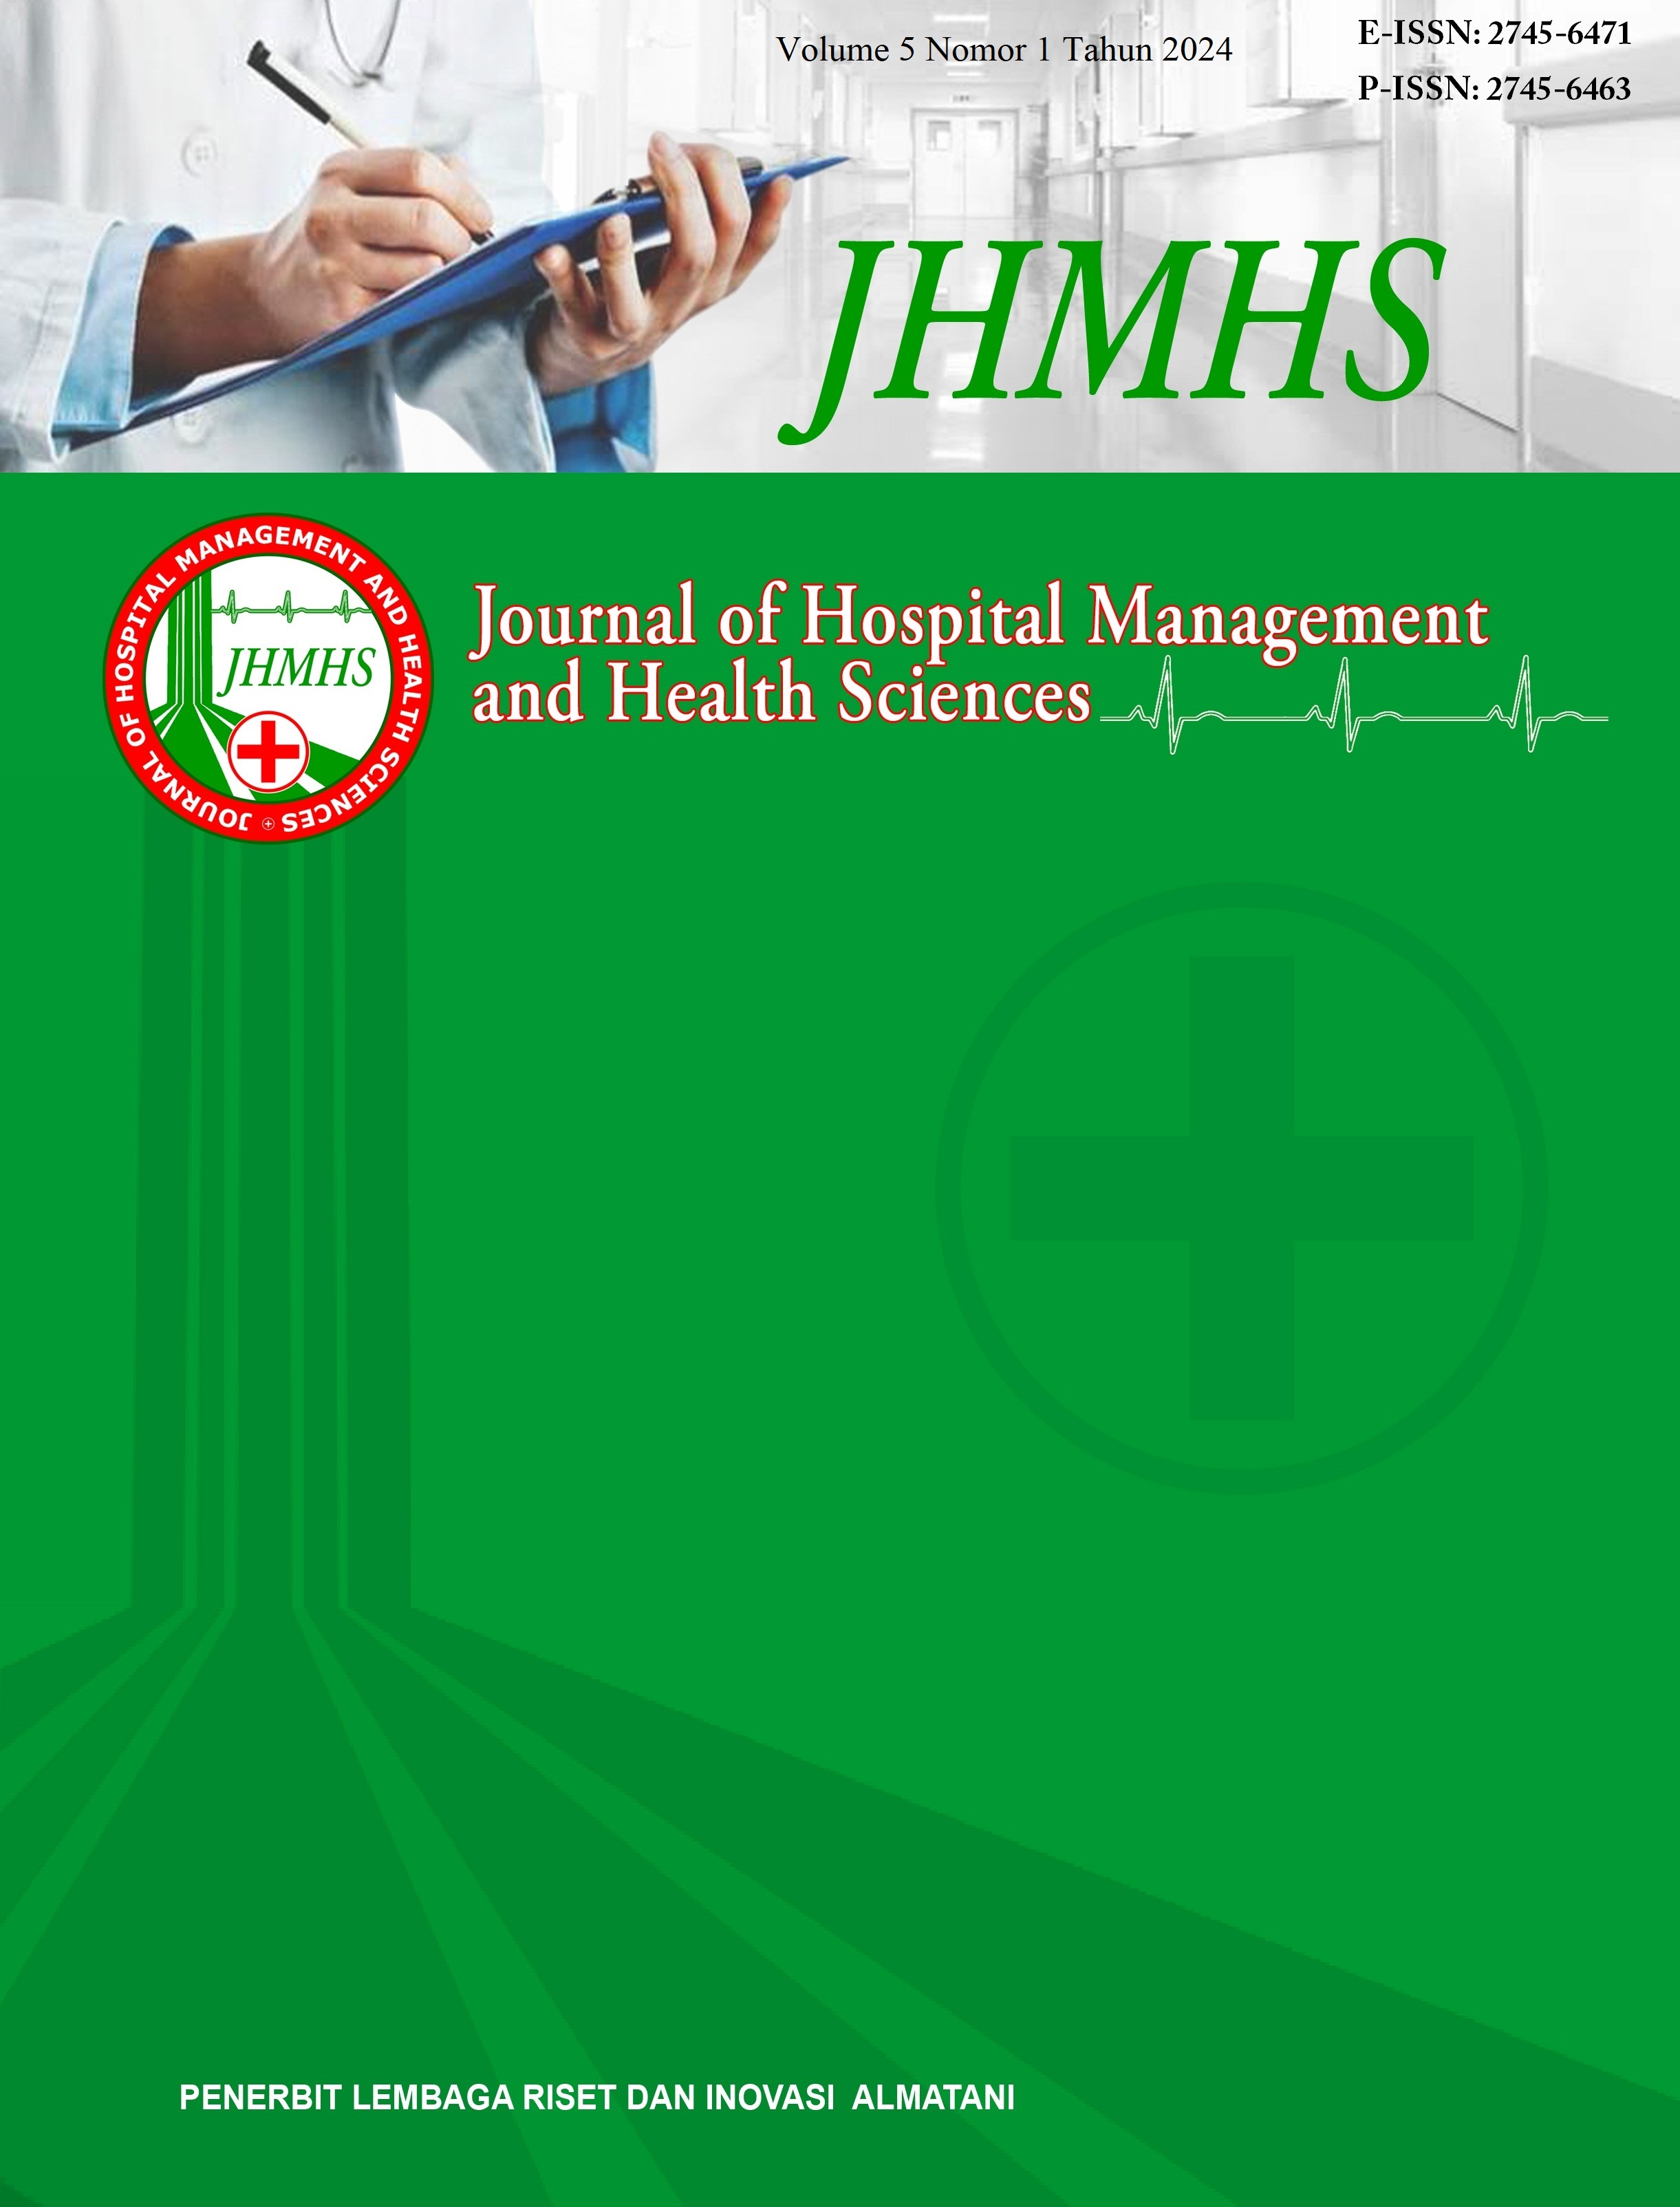 					View Vol. 5 No. 1 (2024): Journal of Hospital Management and Health Sciences (JHMHS)
				